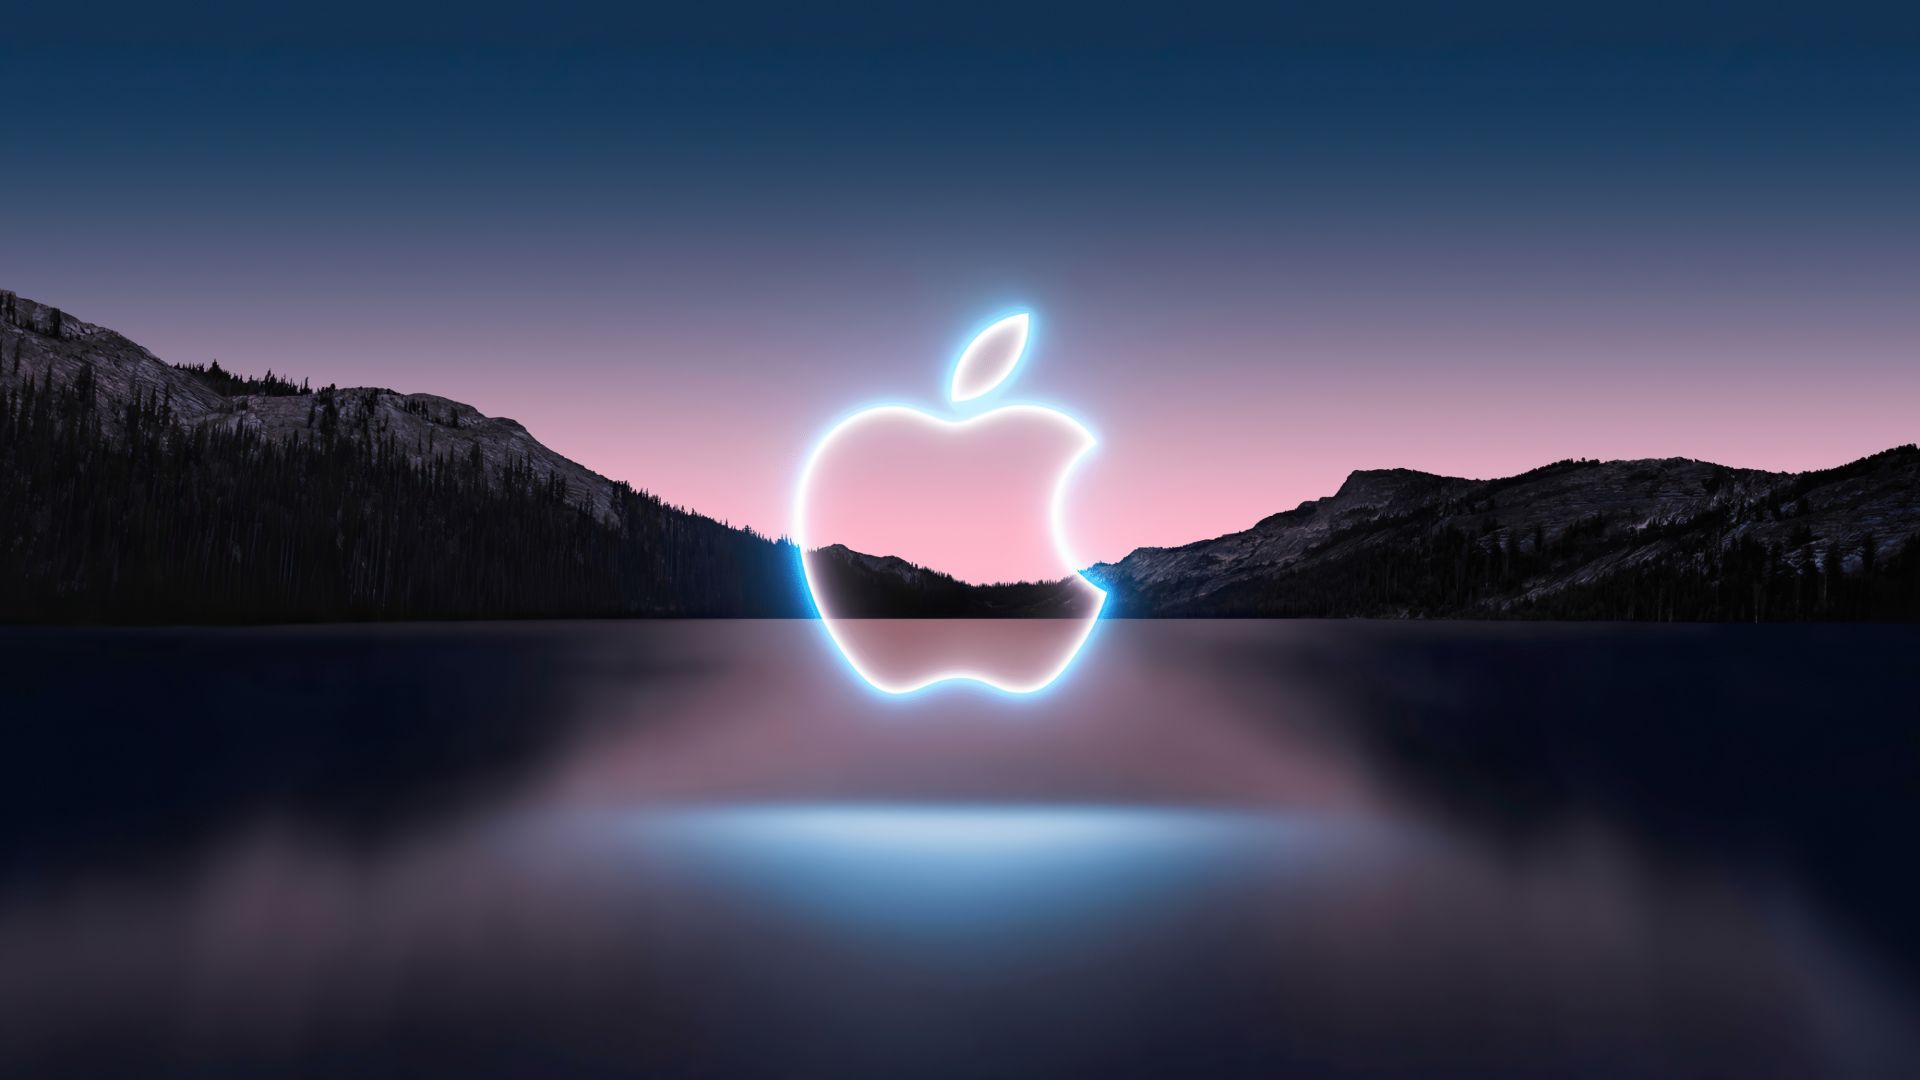 Wallpaper for Mac OSX, Windows 10 and iPhone